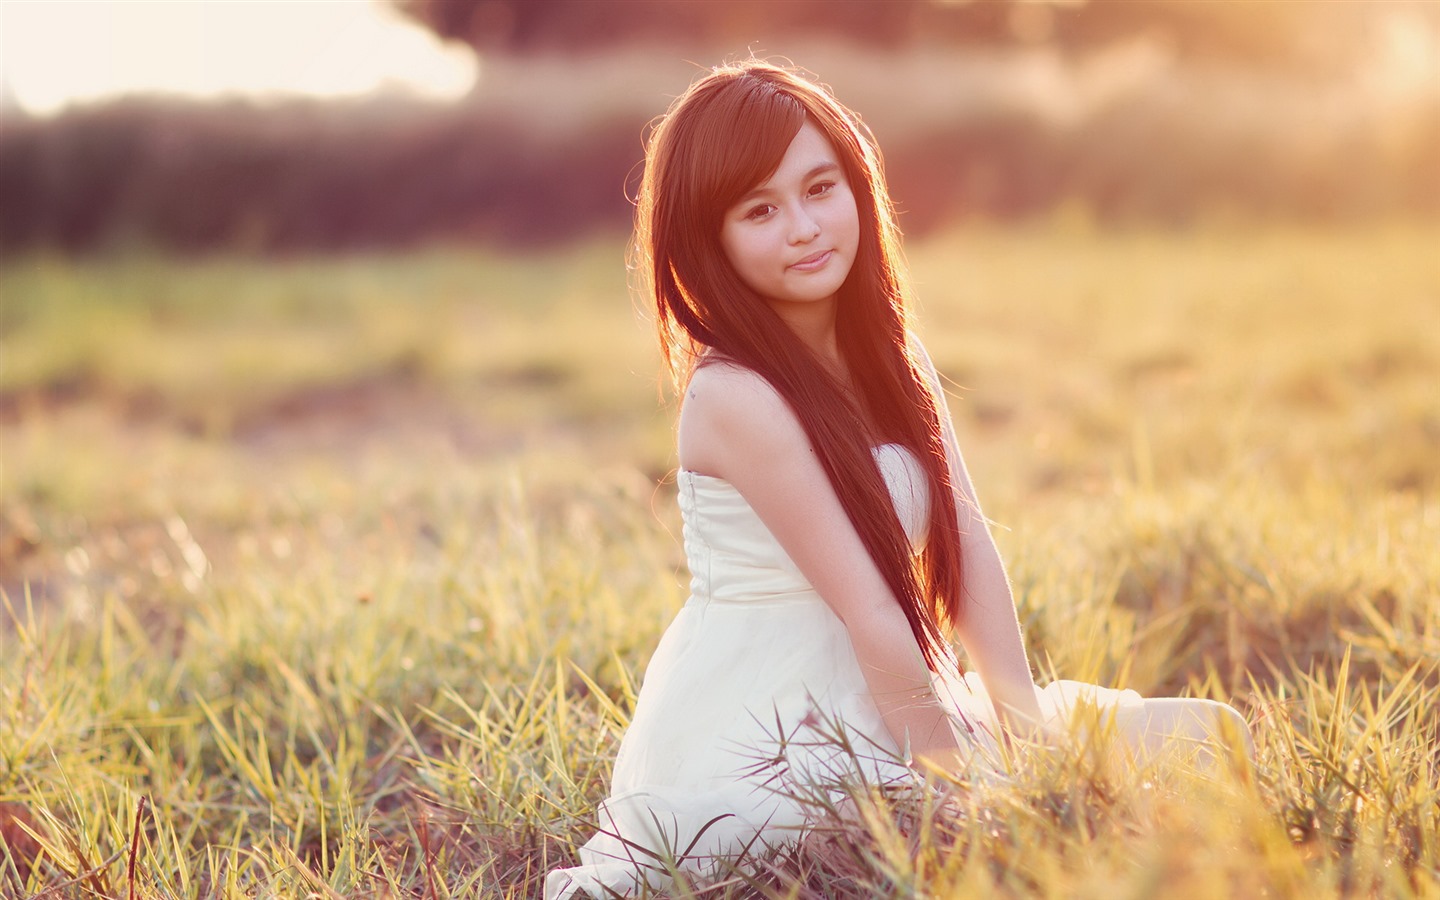 Pure and lovely young Asian girl HD wallpapers collection (5) #29 - 1440x900